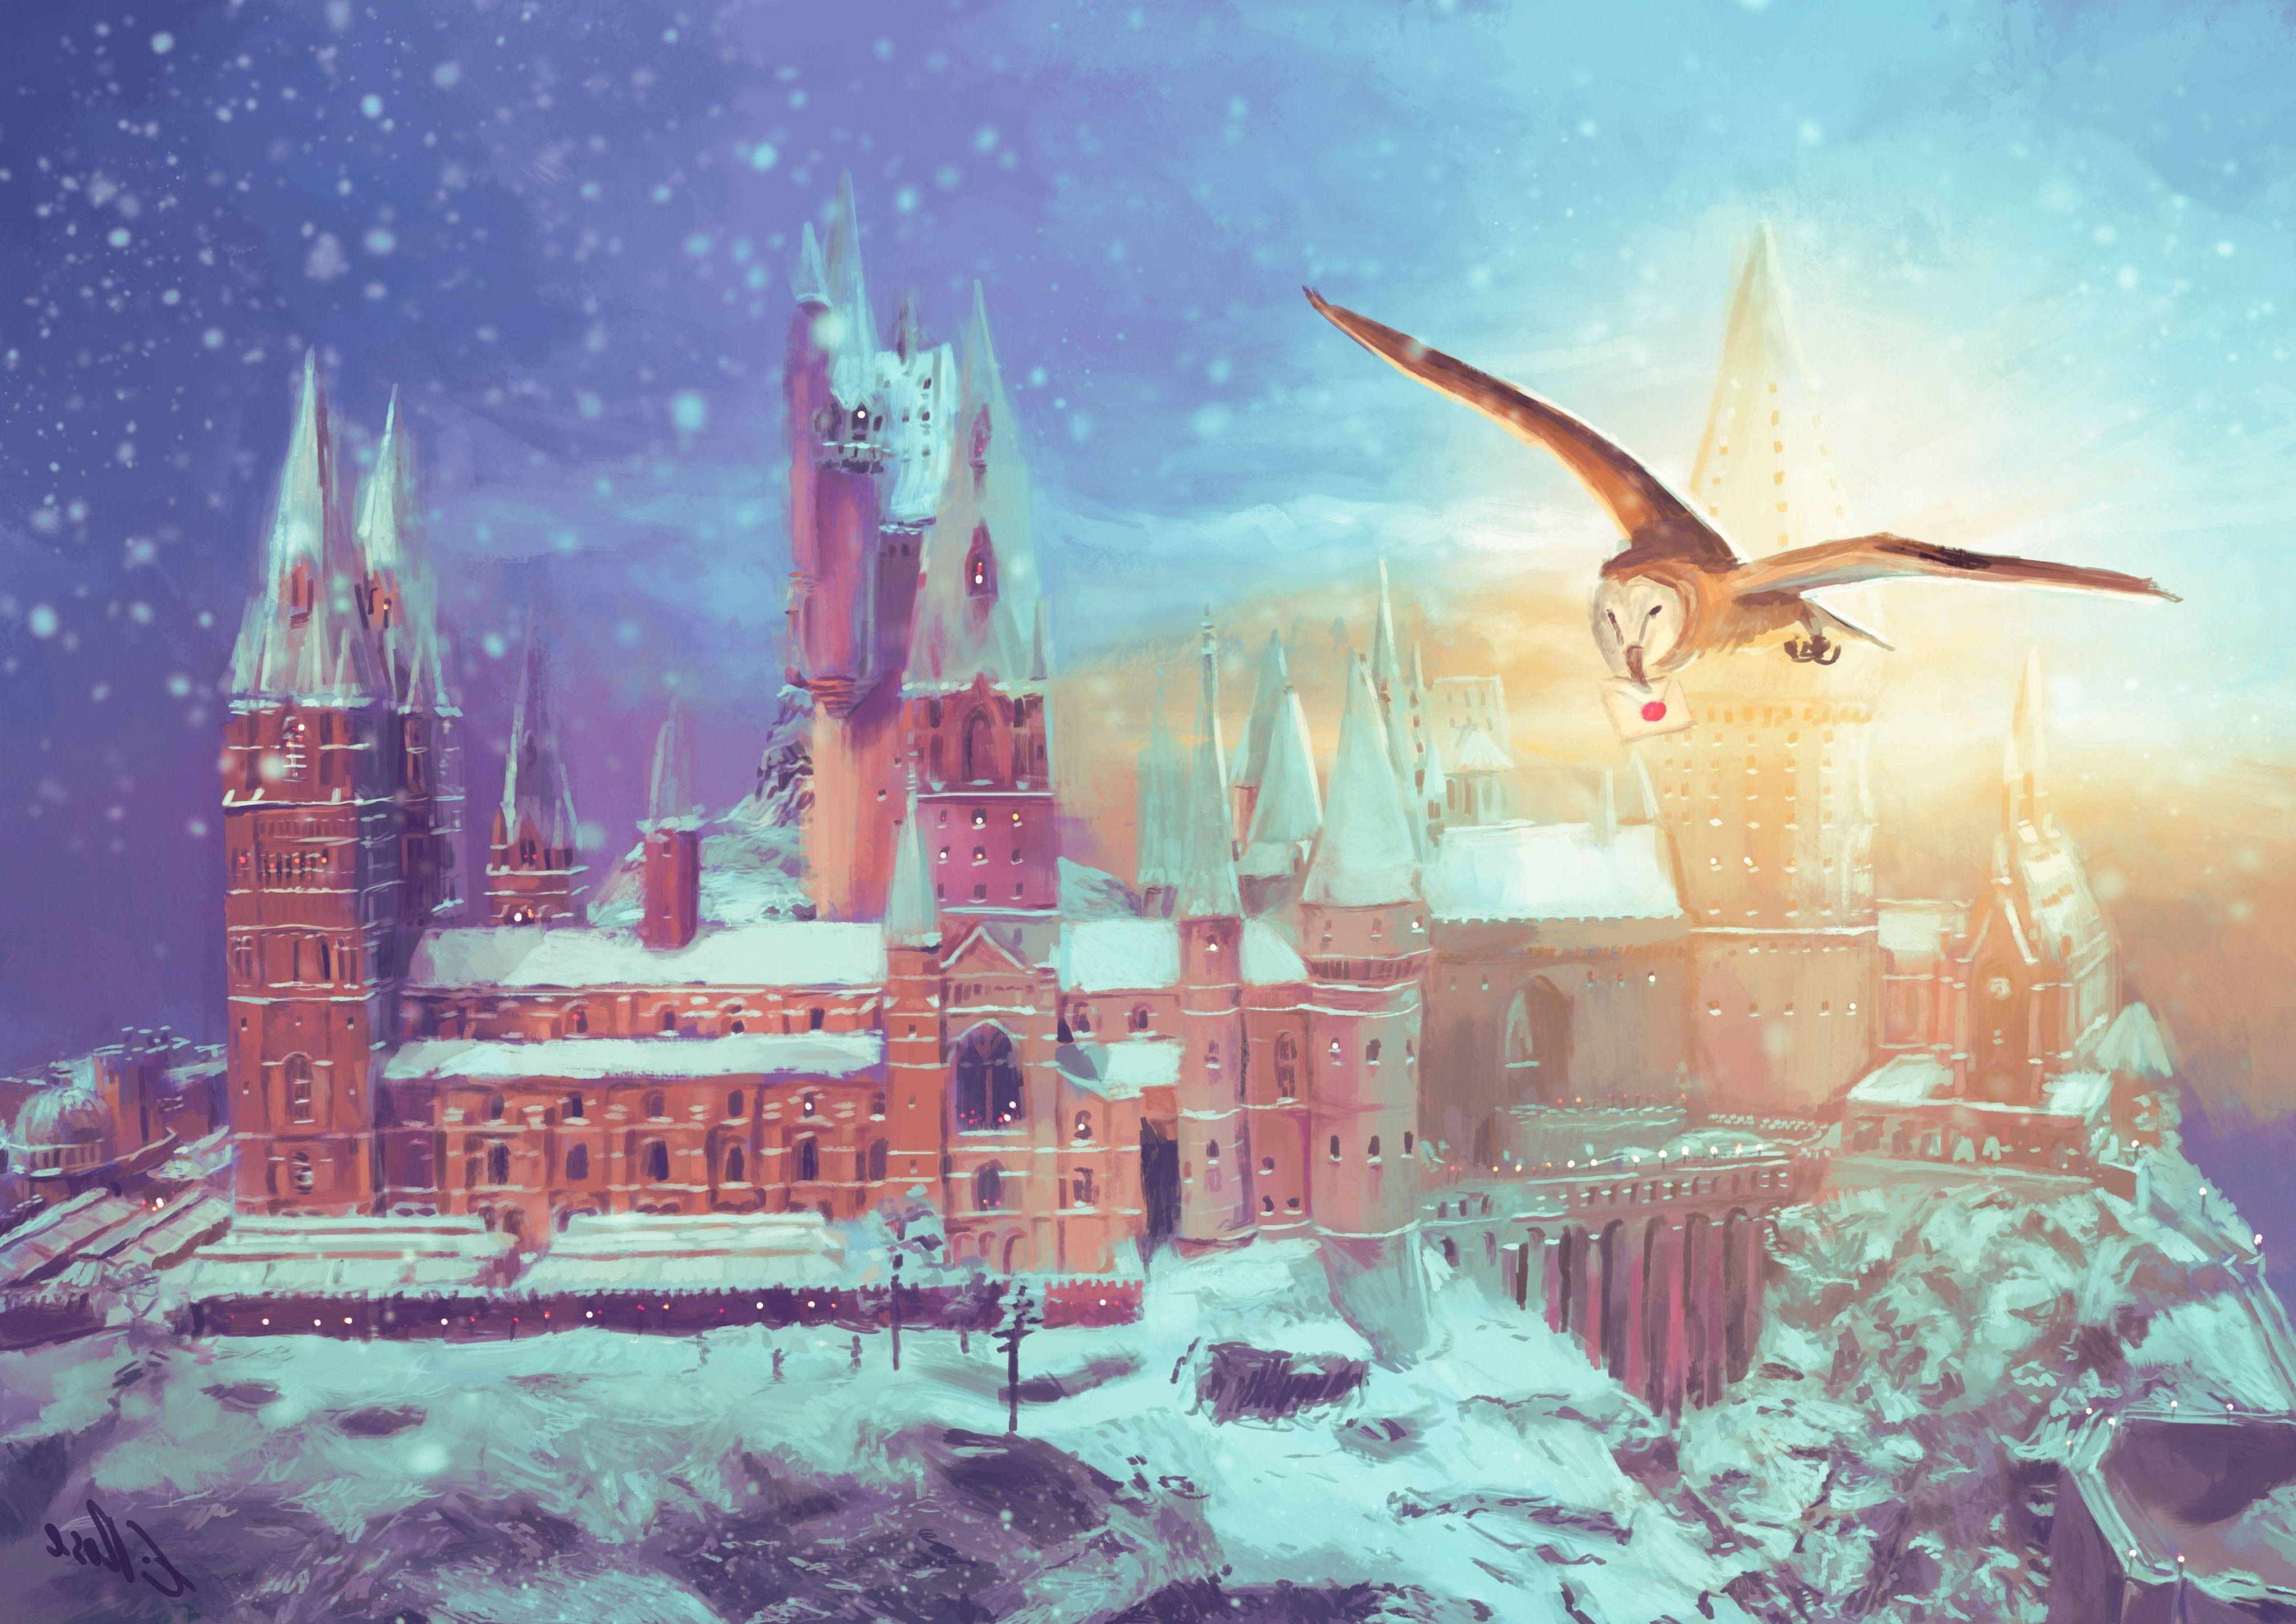 Hogwarts Snow Wallpapers - Top Free Hogwarts Snow Backgrounds ...